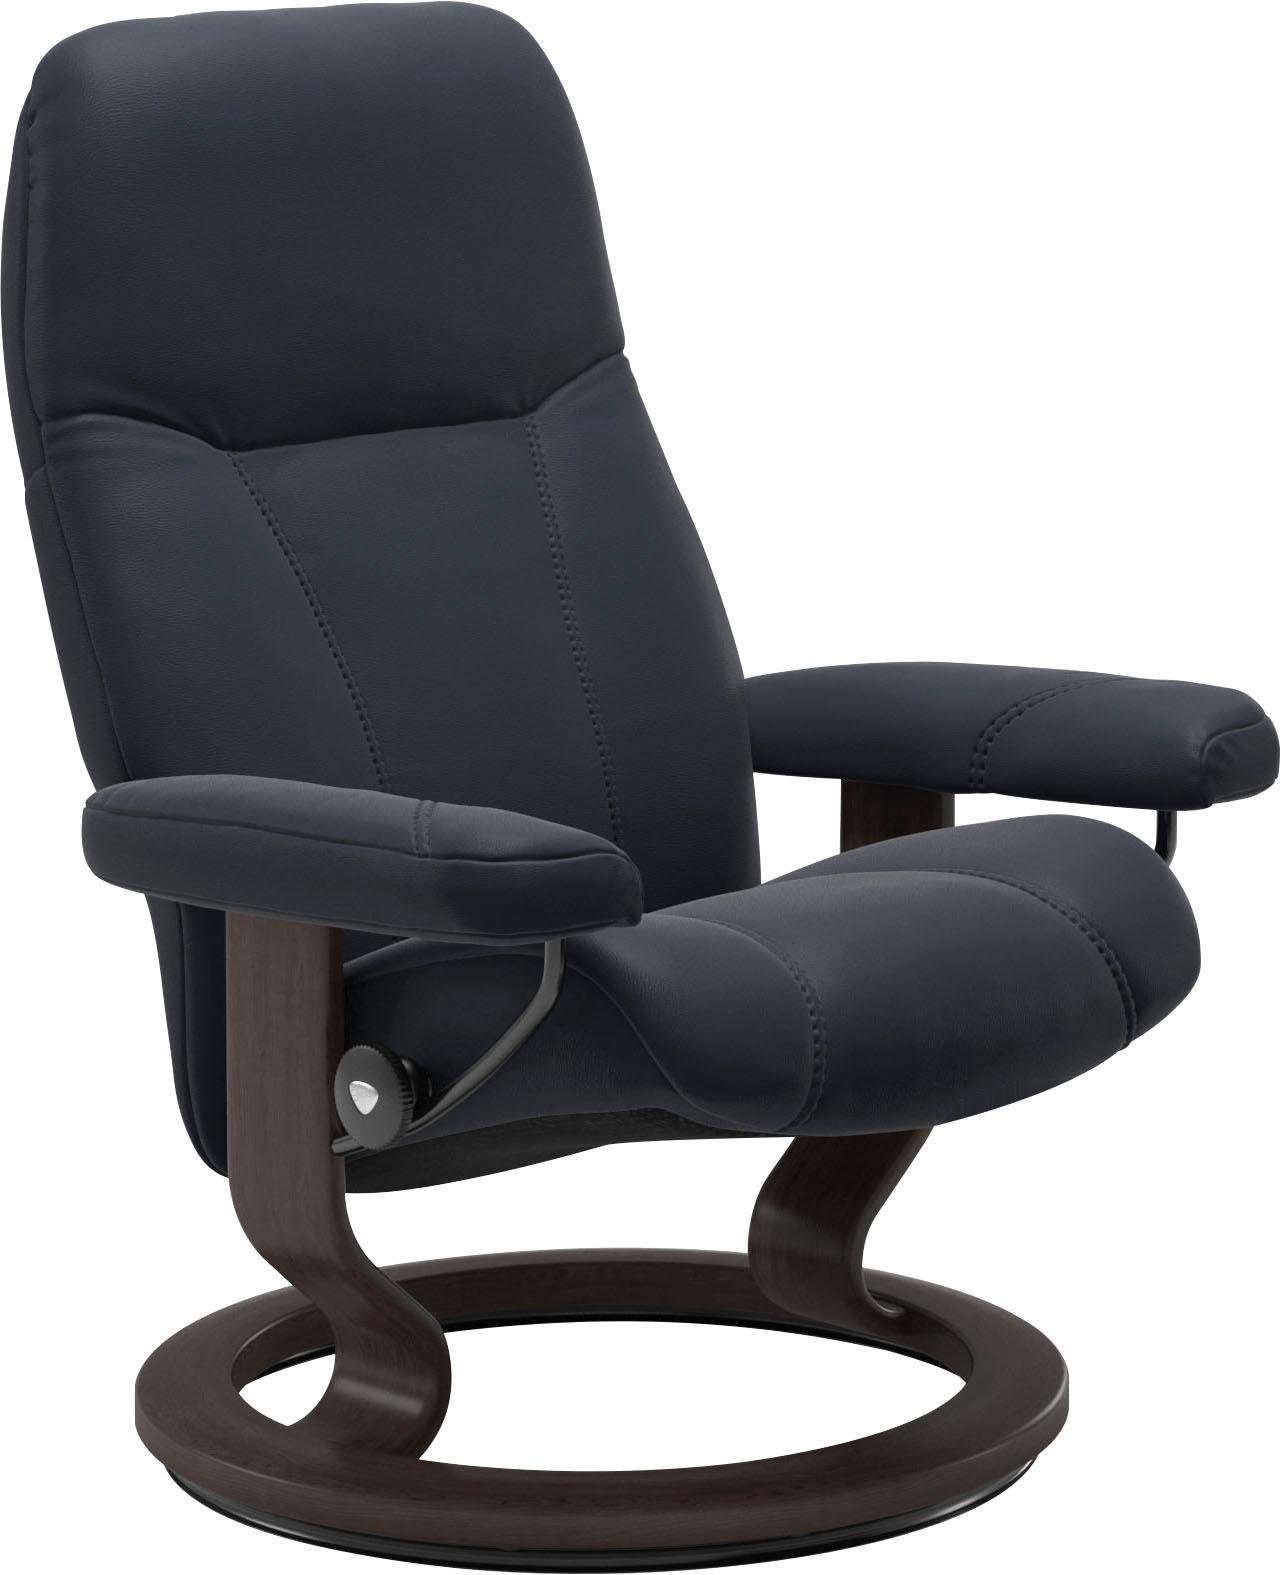 Stressless® Relaxsessel Consul, mit Classic Gestell M, Größe Wenge Base